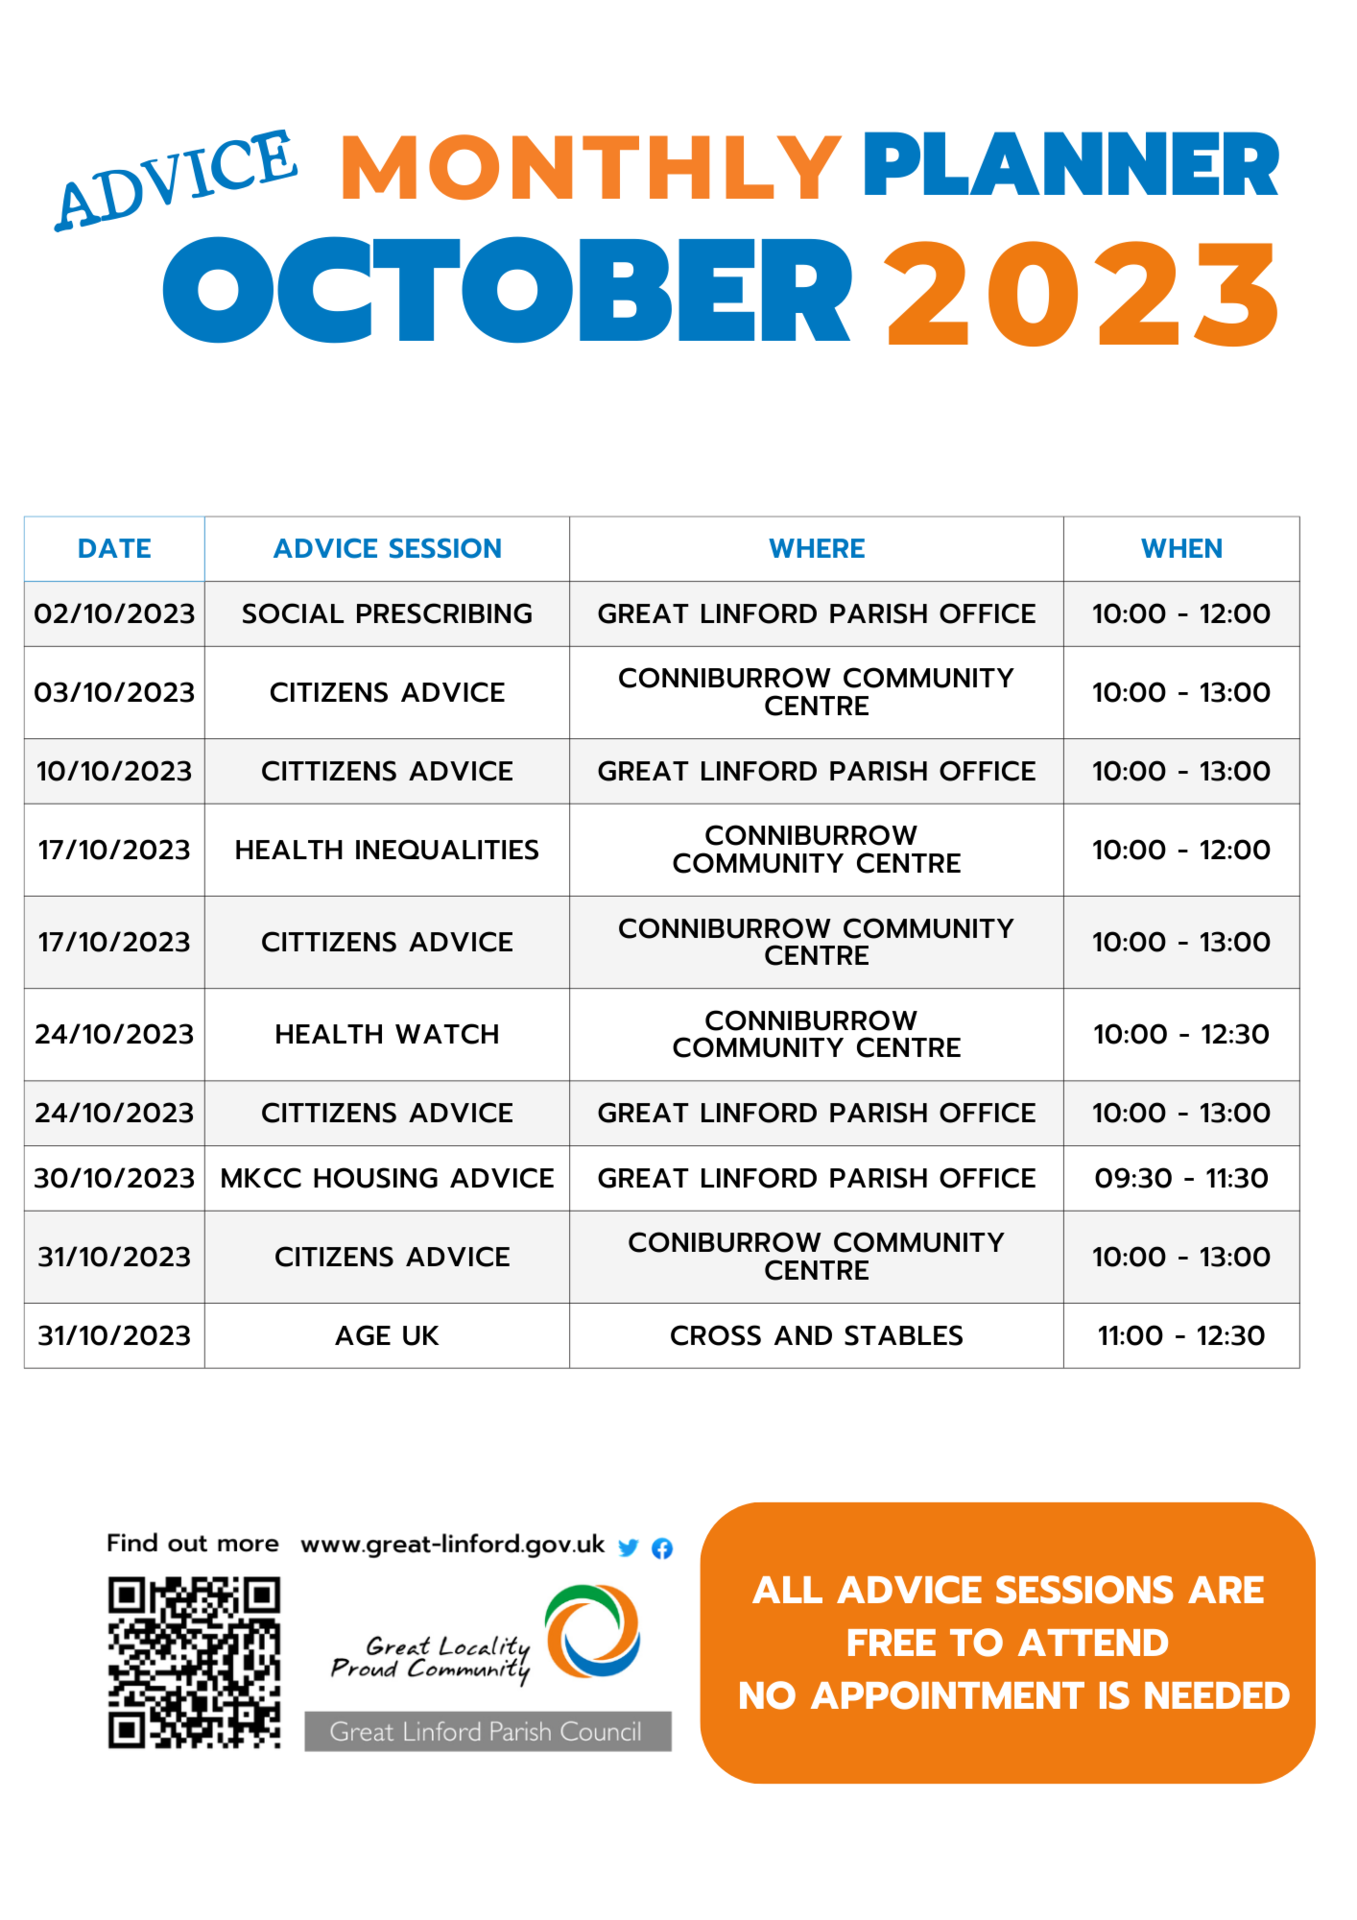 Advice Sessions Rota for October